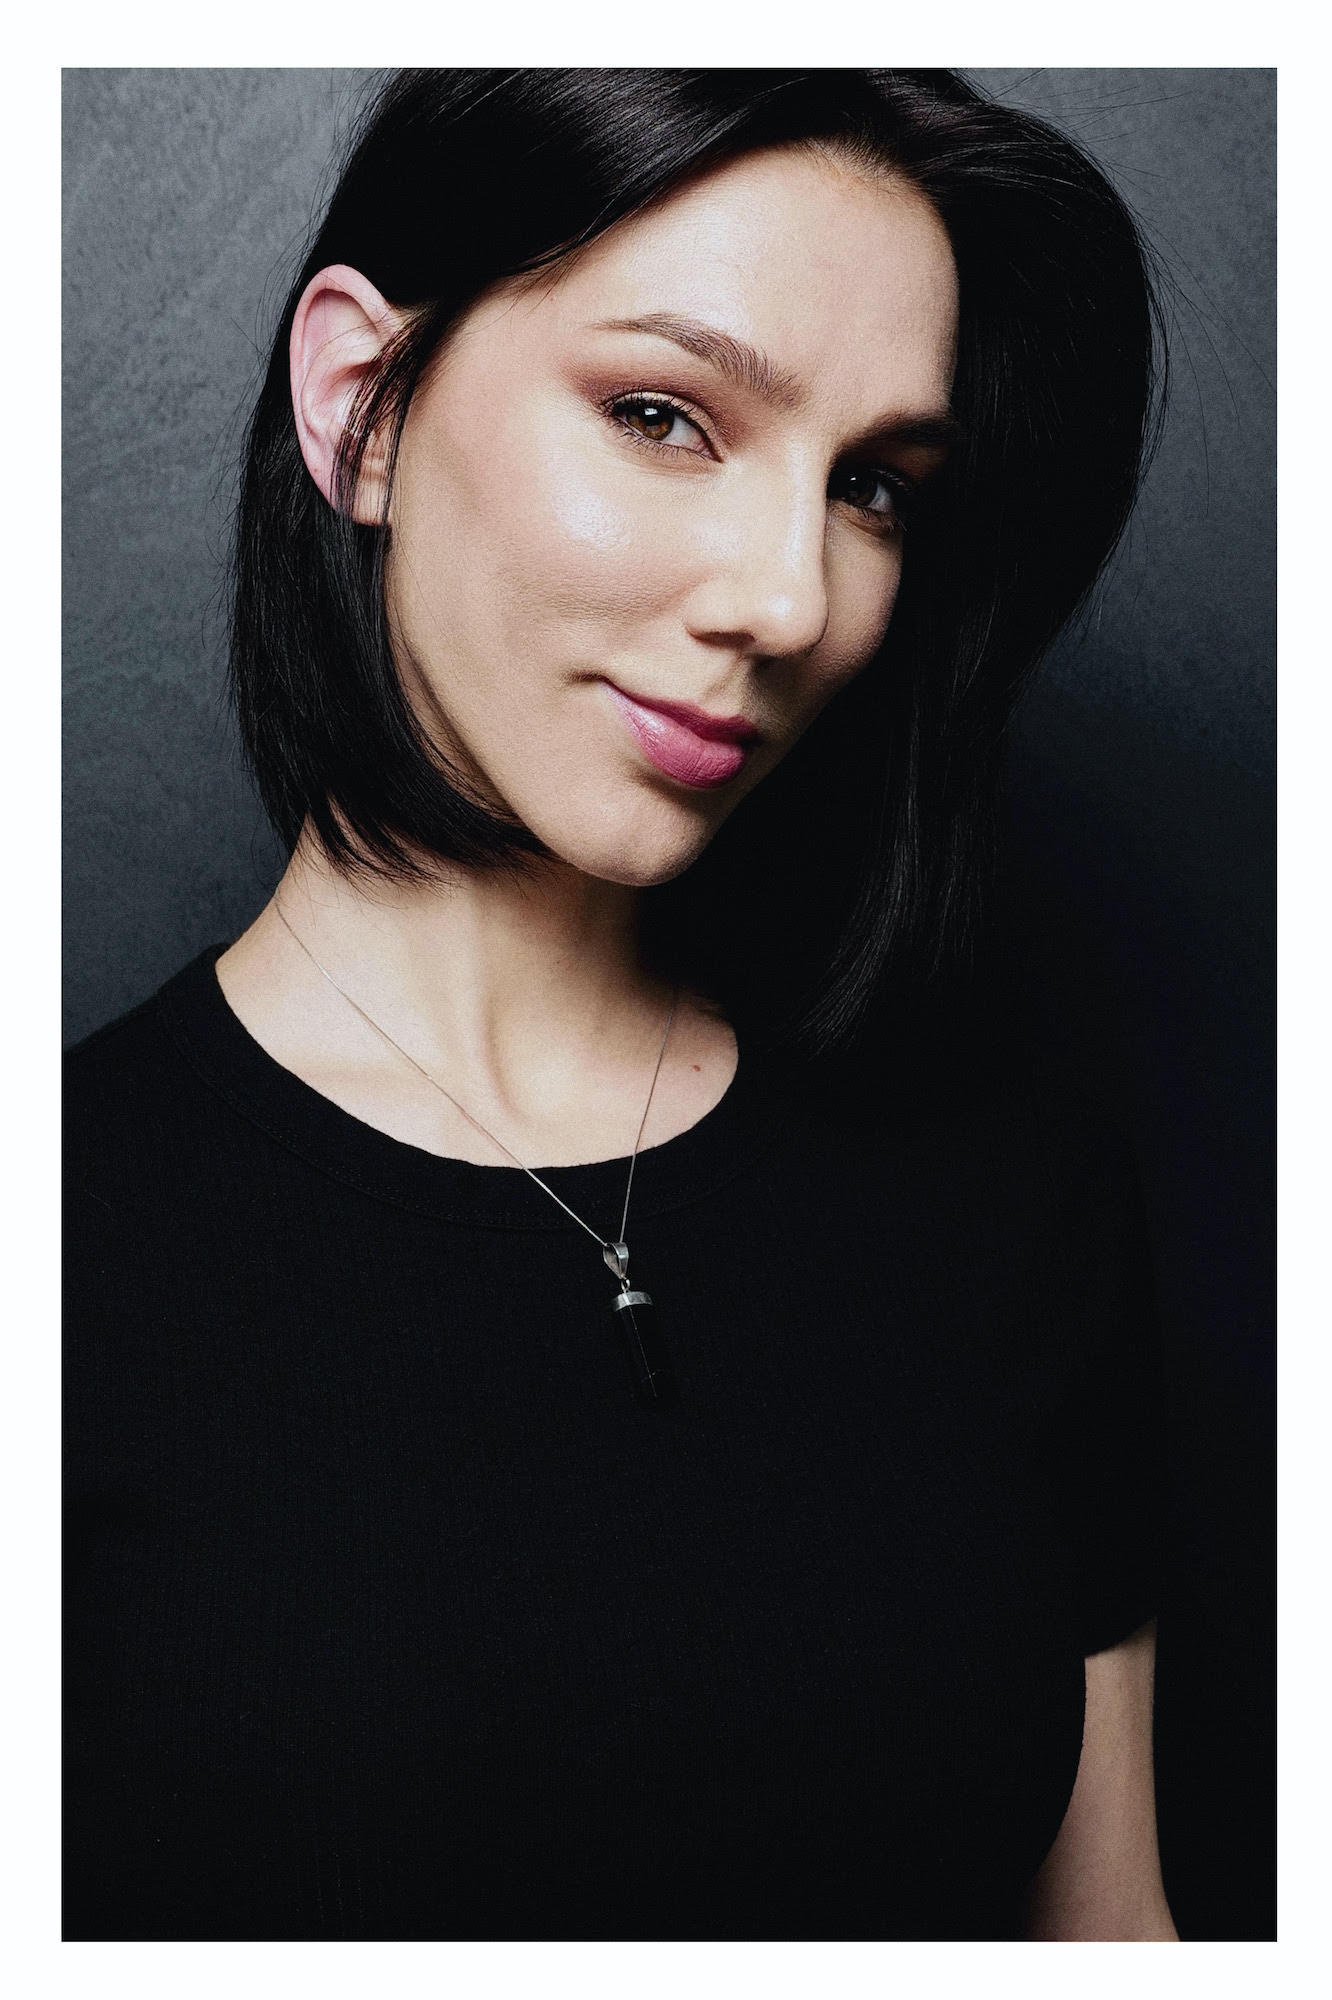 skinny white woman with short black hair wearing black shirt soft smiling for the camera with a side eye